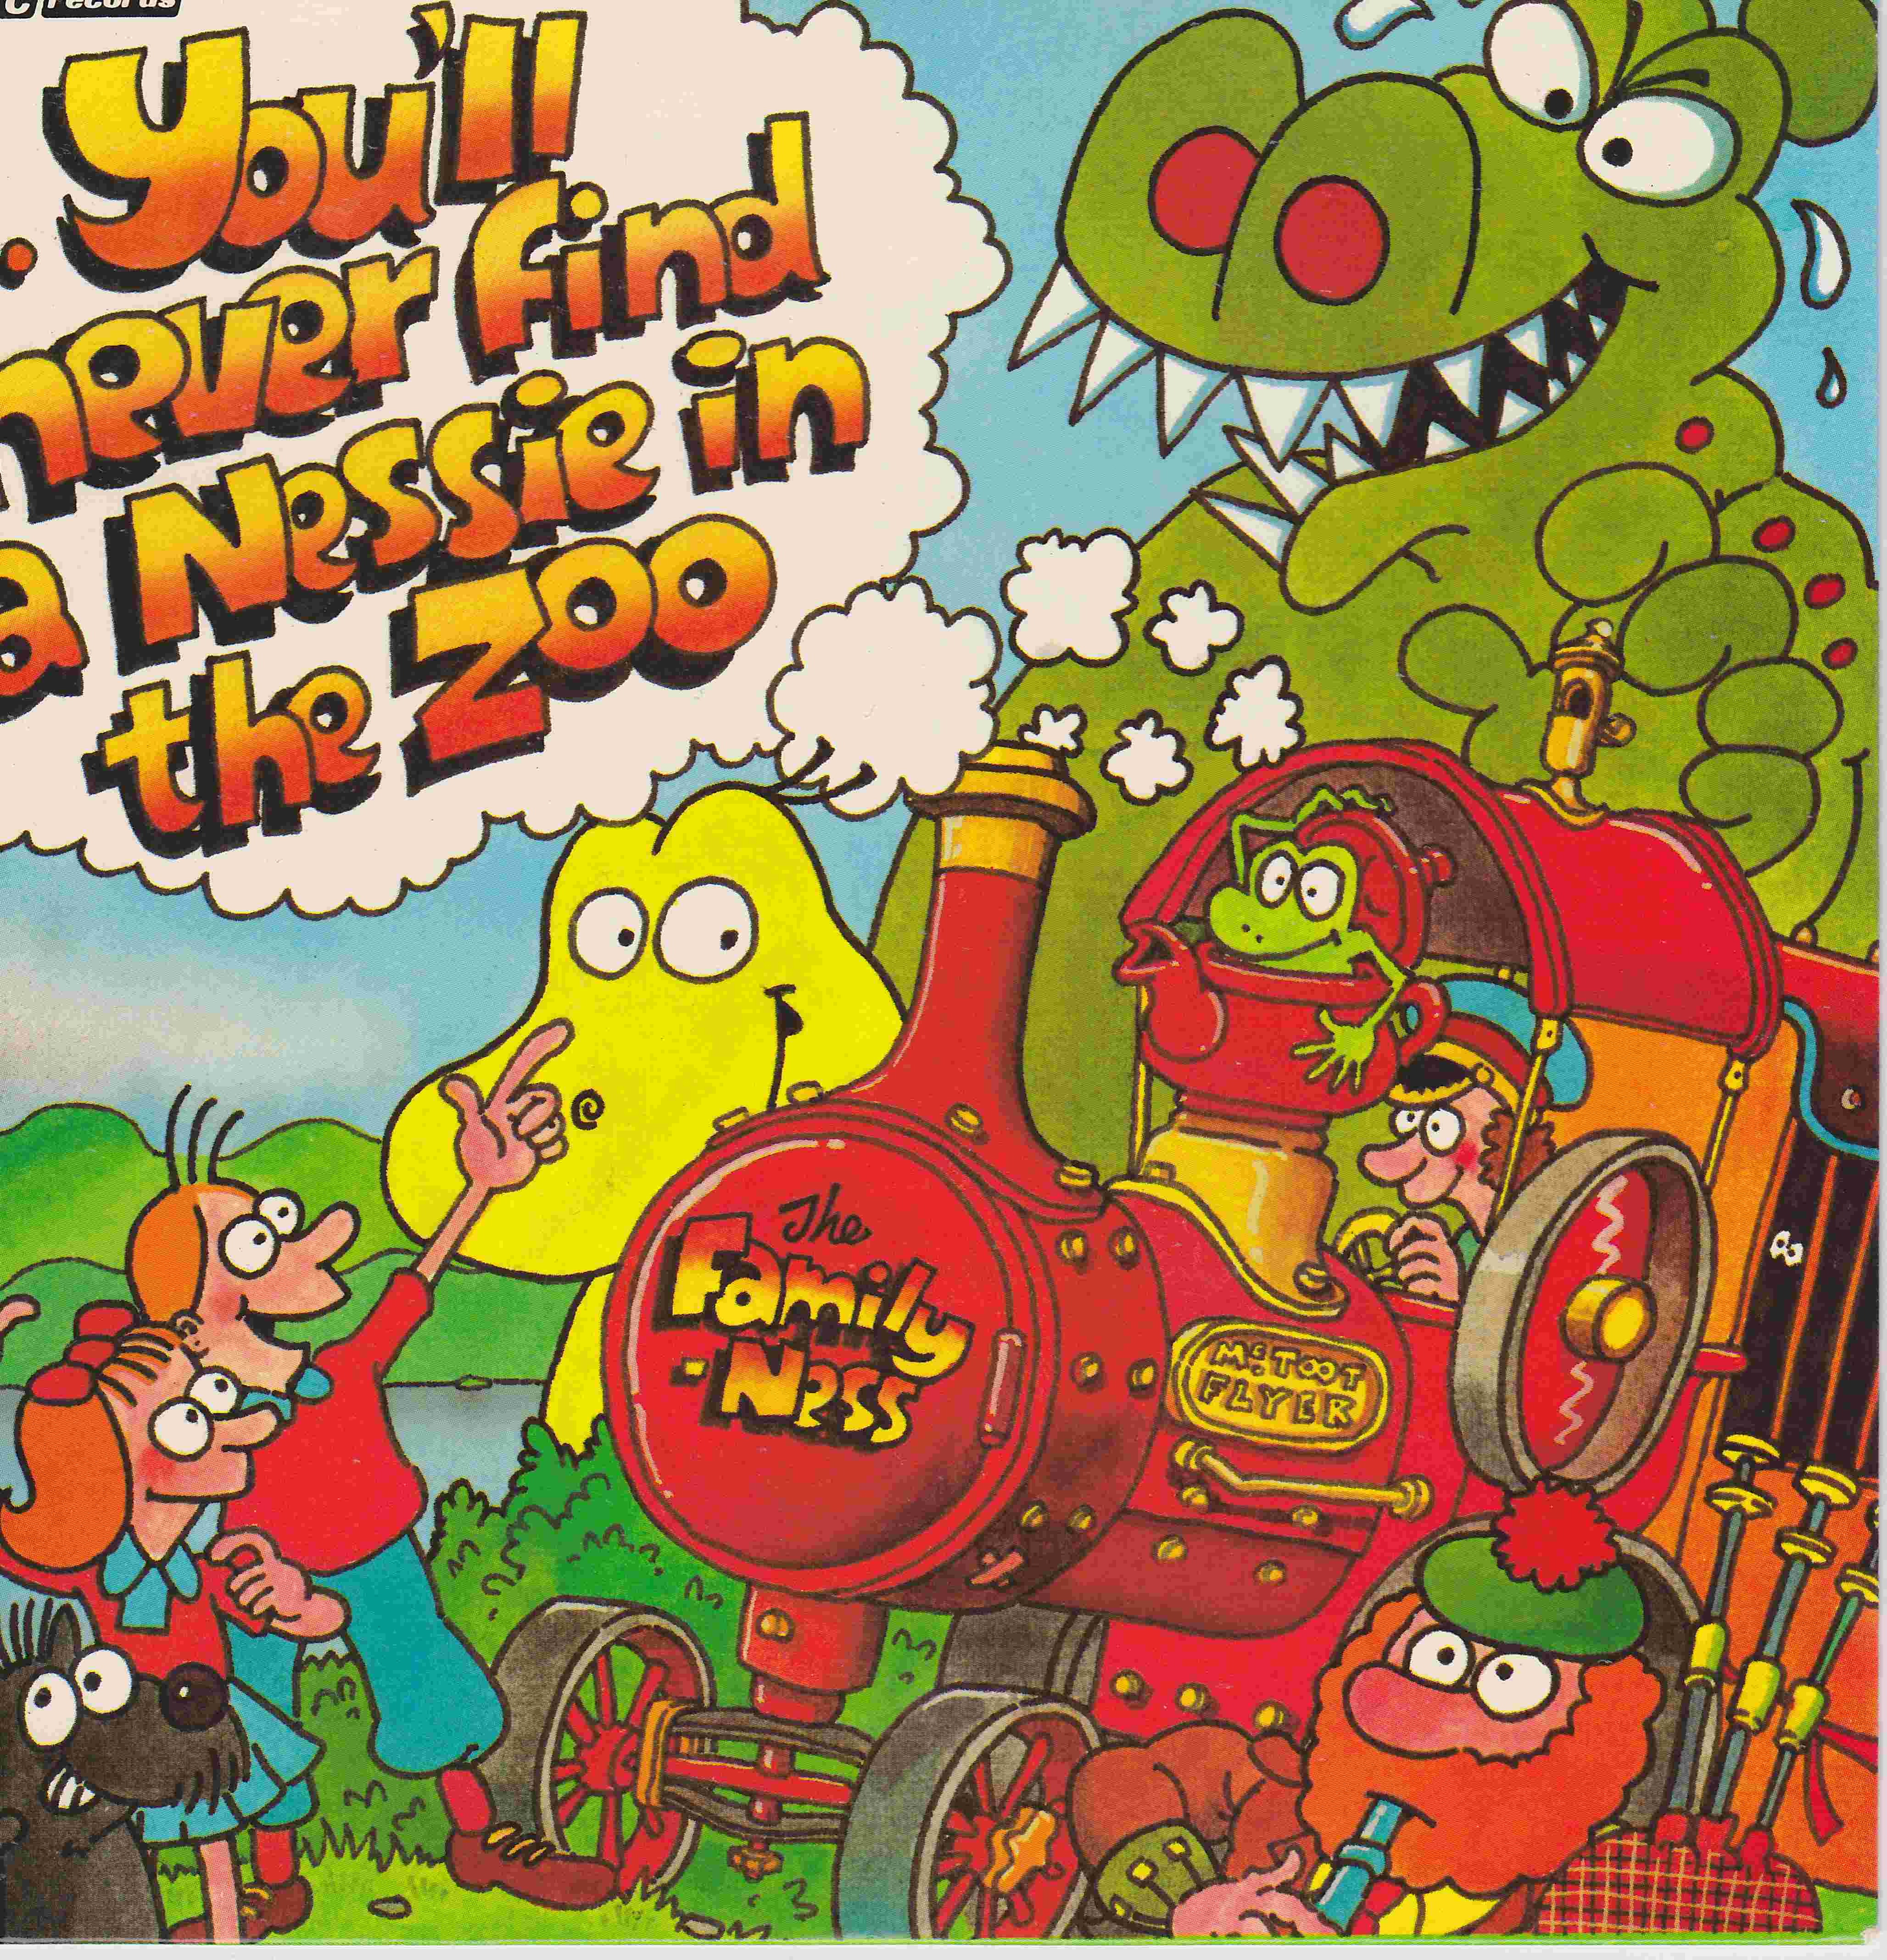 Picture of RESL 155 You'll never find a Nessie (The family ness) by artist Roger Greenaway / Gavin Greenaway / The Family Ness from the BBC singles - Records and Tapes library